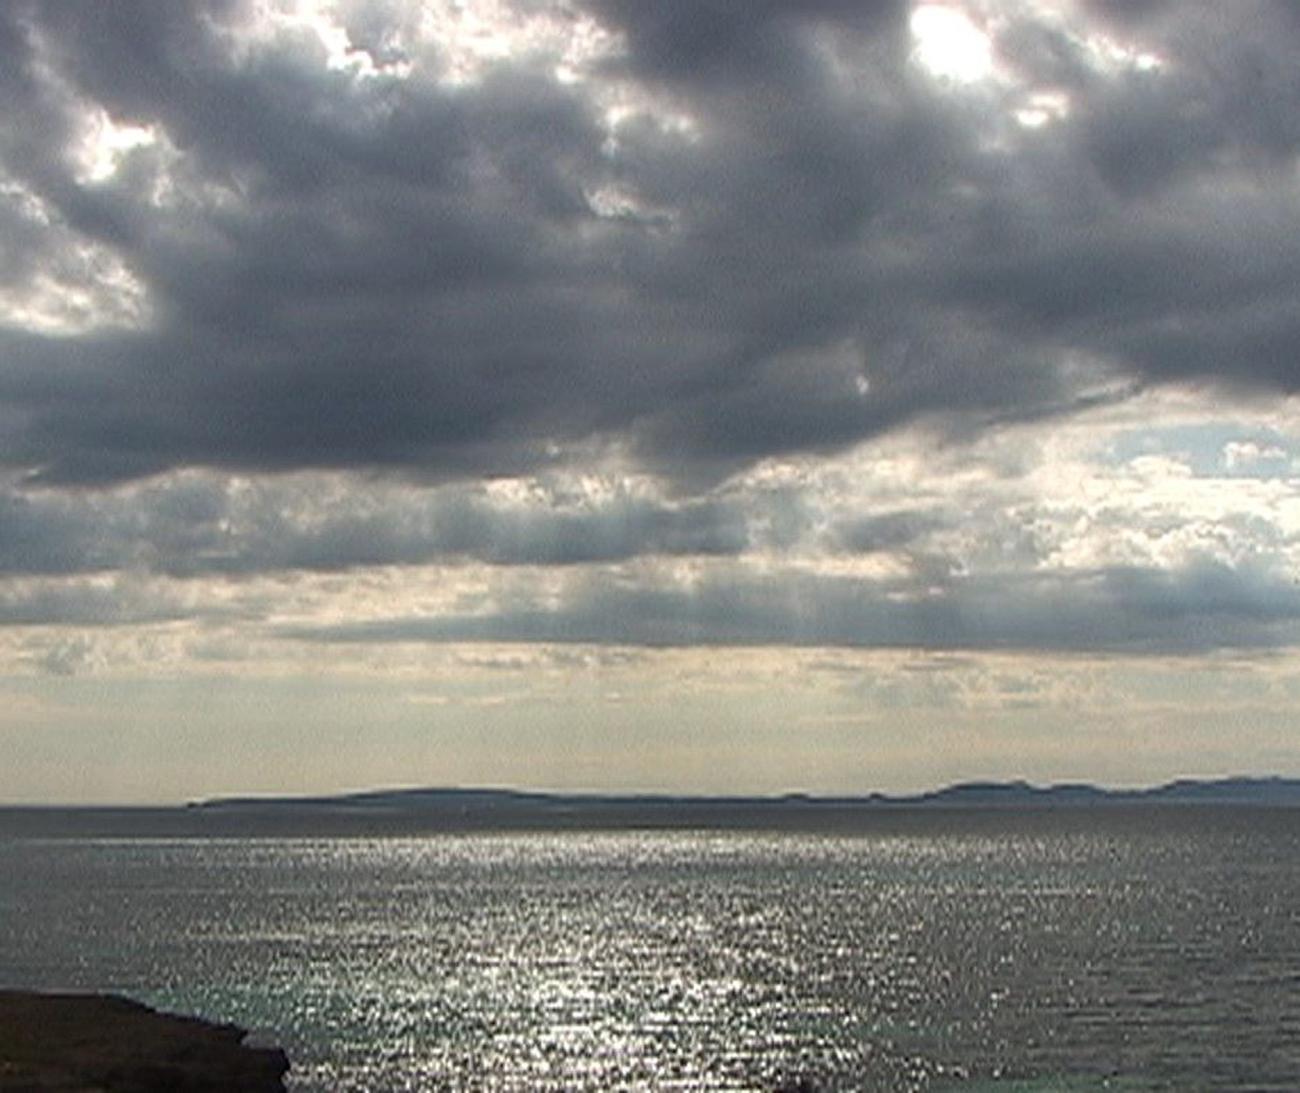 sunrays shine down from gray clouds onto a bumpy ocean. Silhouetted islands appear on the horizon line.